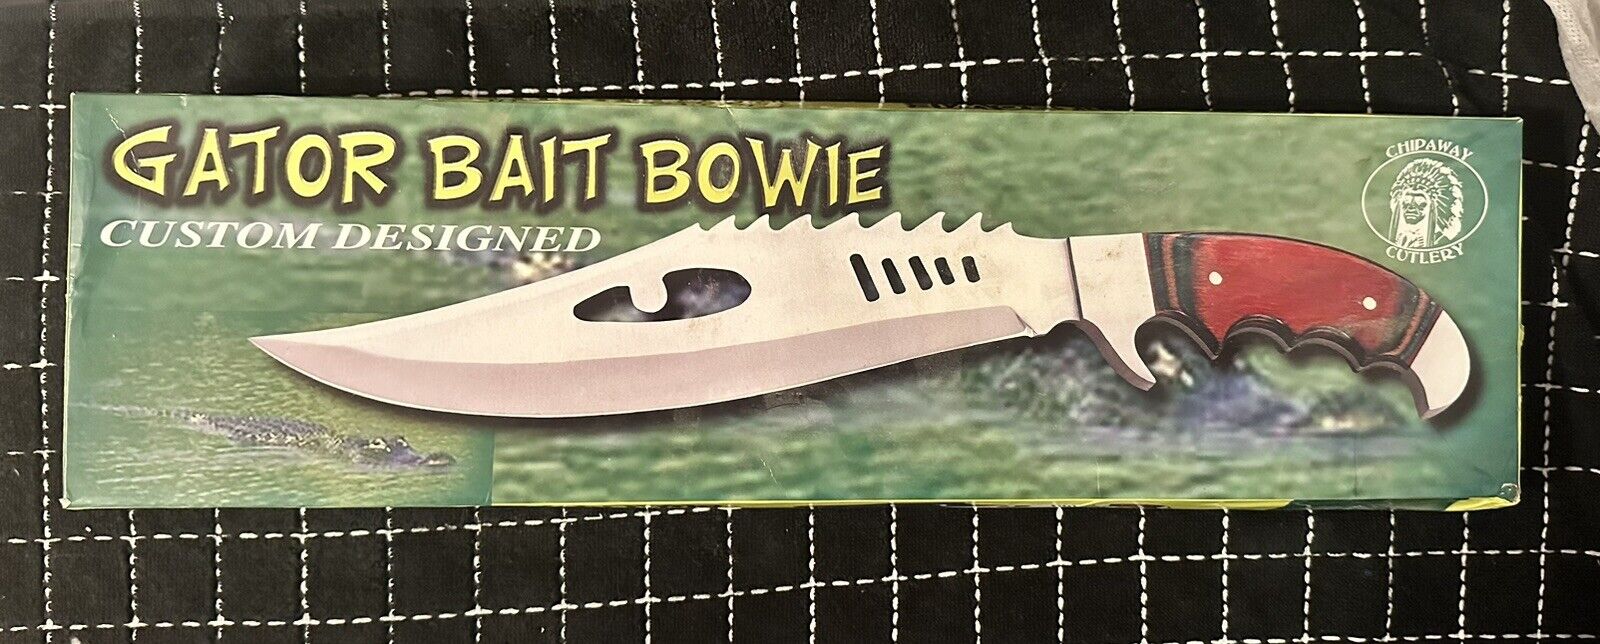 Chipaway Cutlery Gator Bait Bowie Knife **ORIGINAL BOX AND SCABBARD**